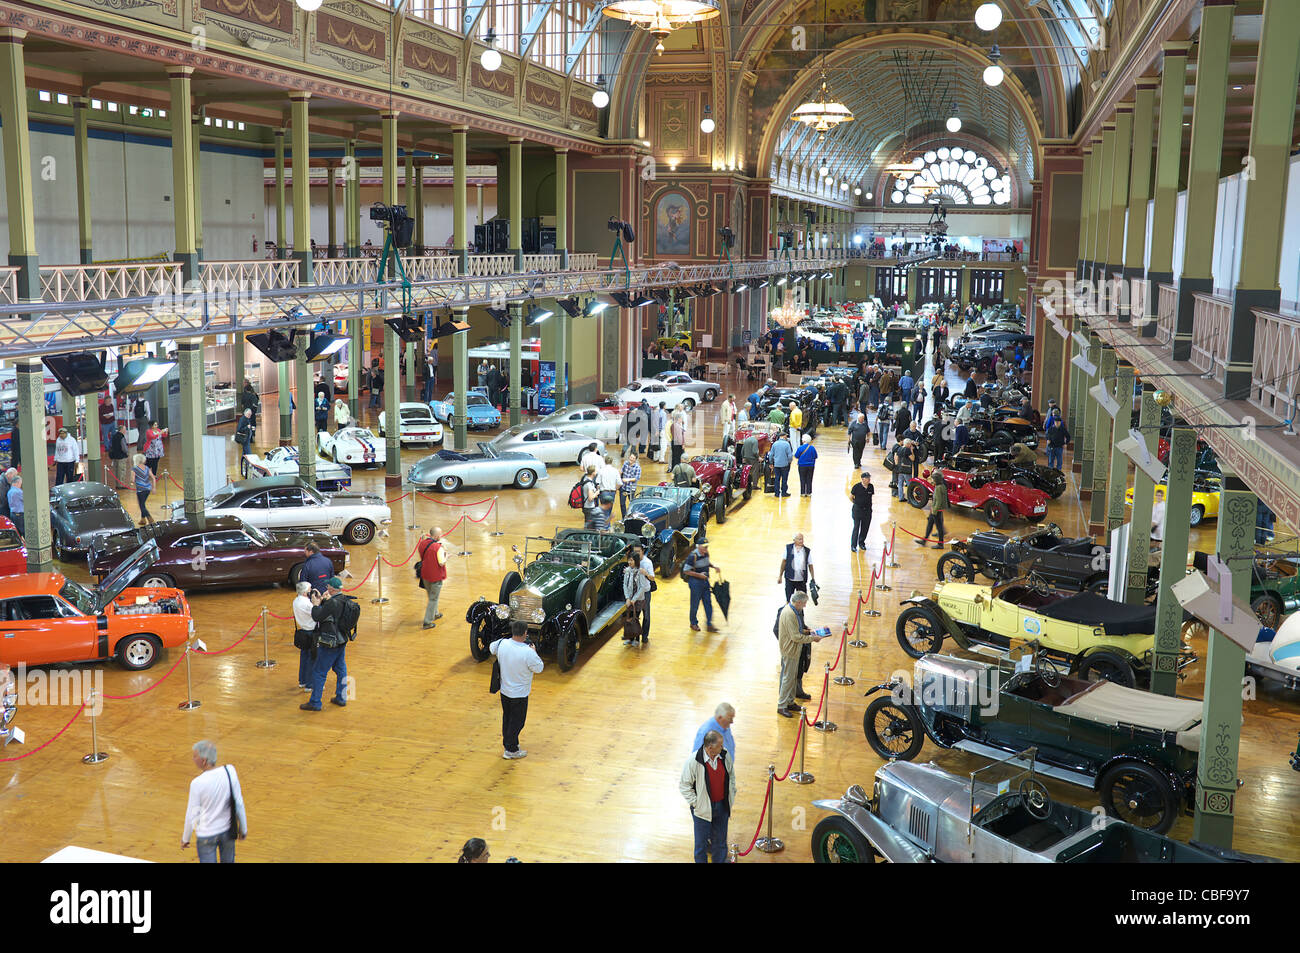 Main Hall at the Motorclassica Concours D'Elegance at the Royal Exhibition Building, Melbourne, Australia. October 2011 Stock Photo